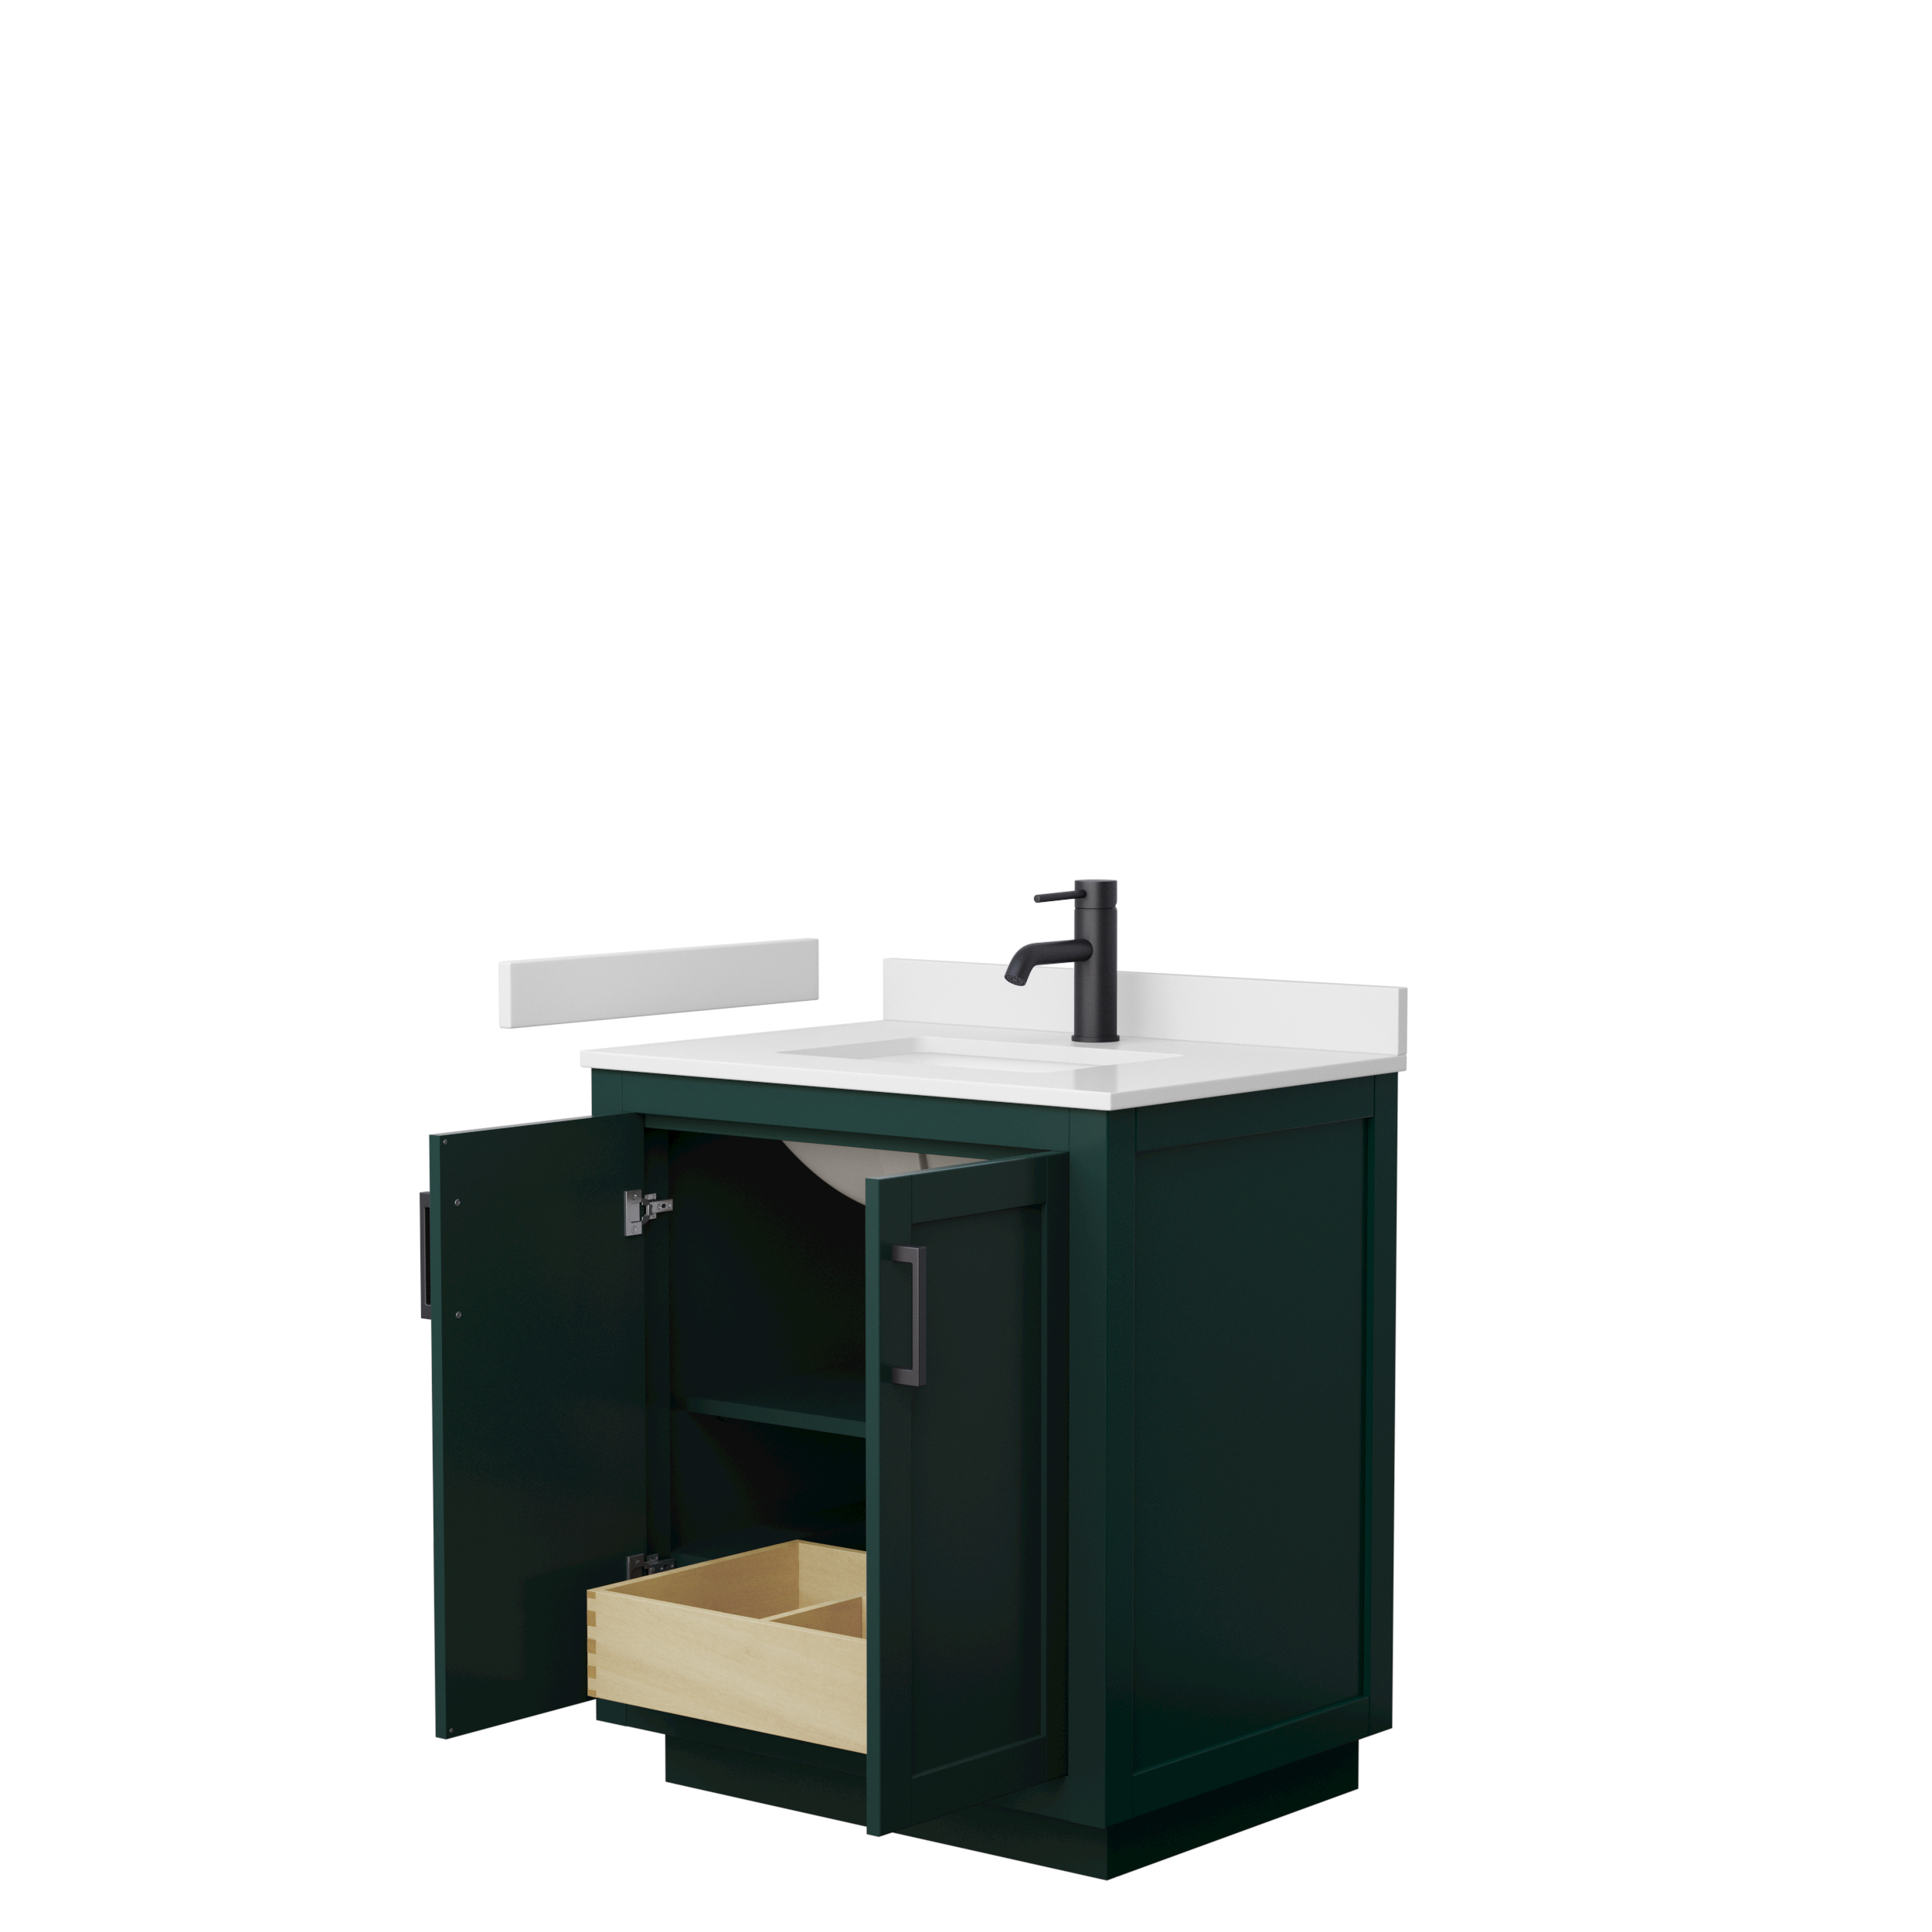 miranda 30" single vanity with optional cultured marble counter - green